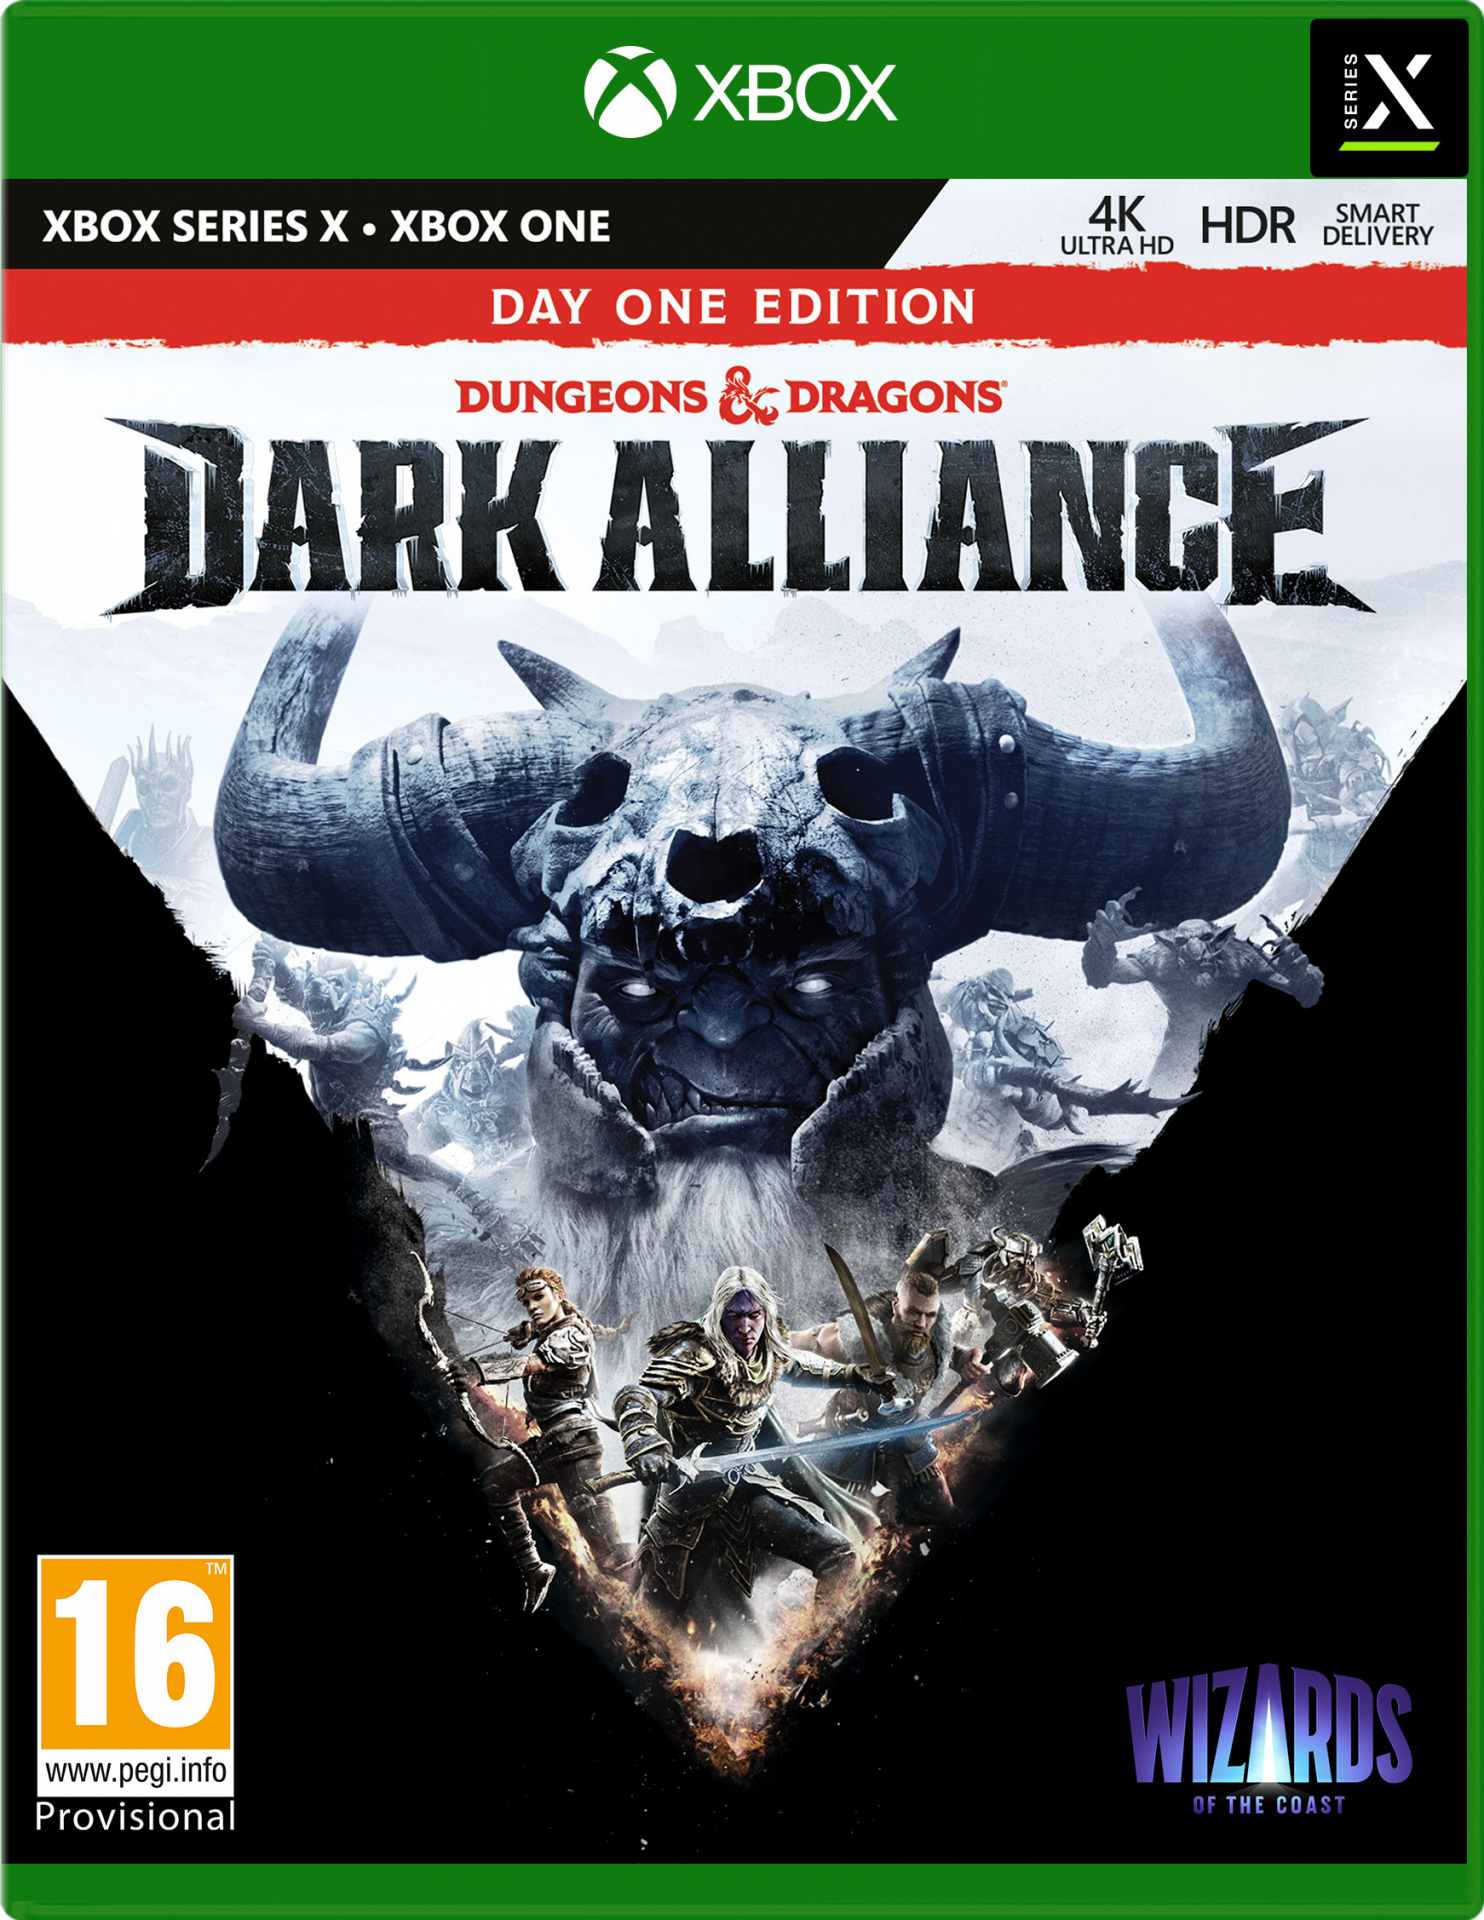 Wizards of the coast Dungeons & Dragons Dark Alliance Day One Edition Xbox One